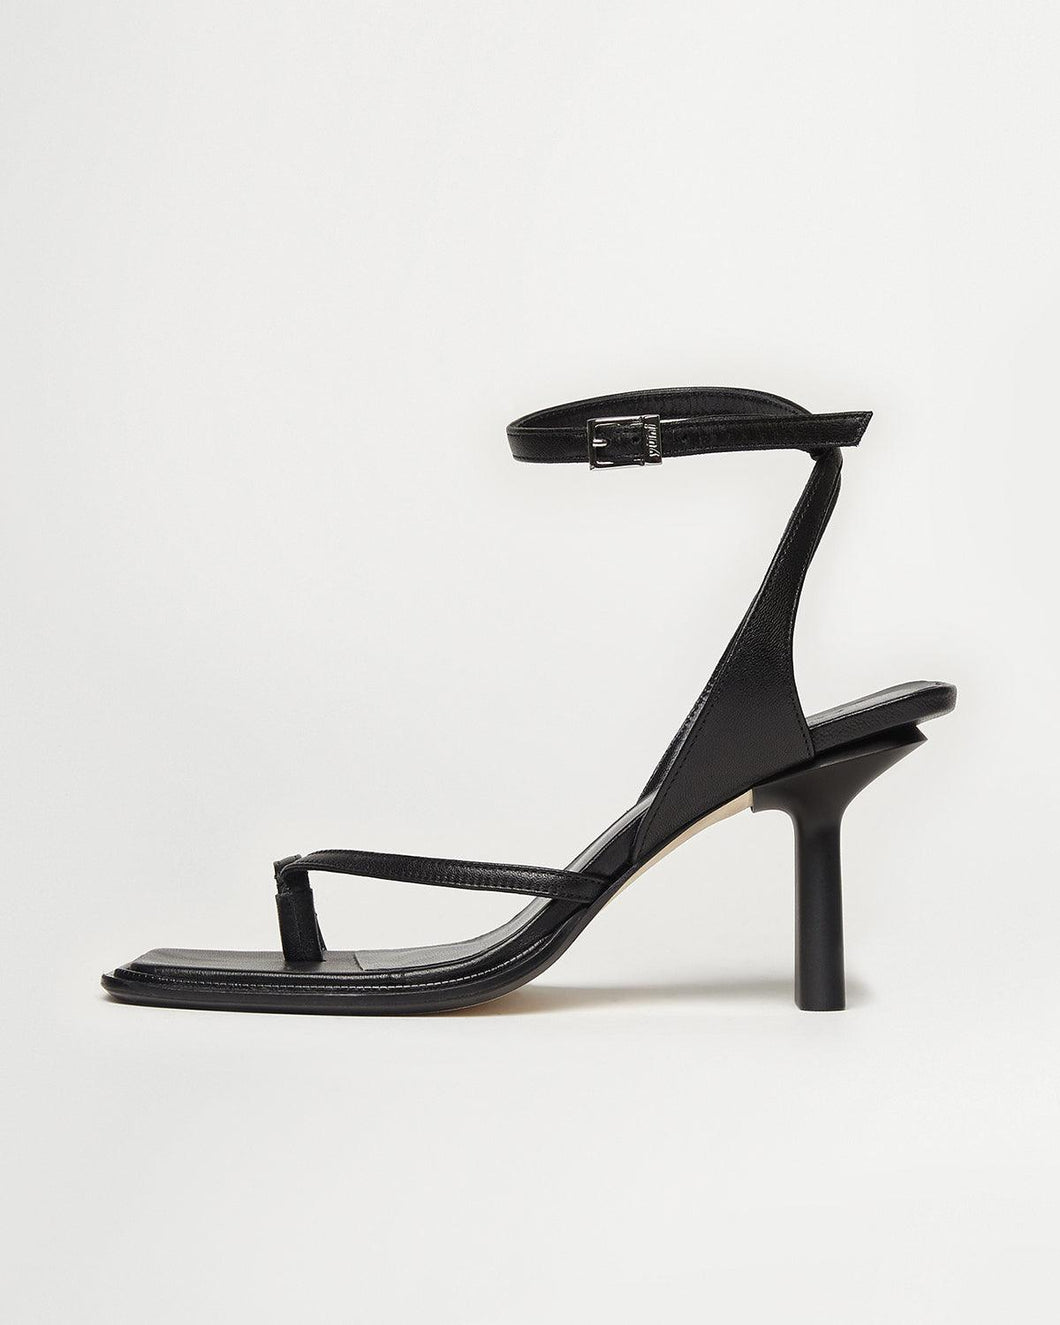 Side view of Yuni Buffa Castrise Heel in Black color made in Italy with Italian Lamb Nappa leather and silver logo buckle